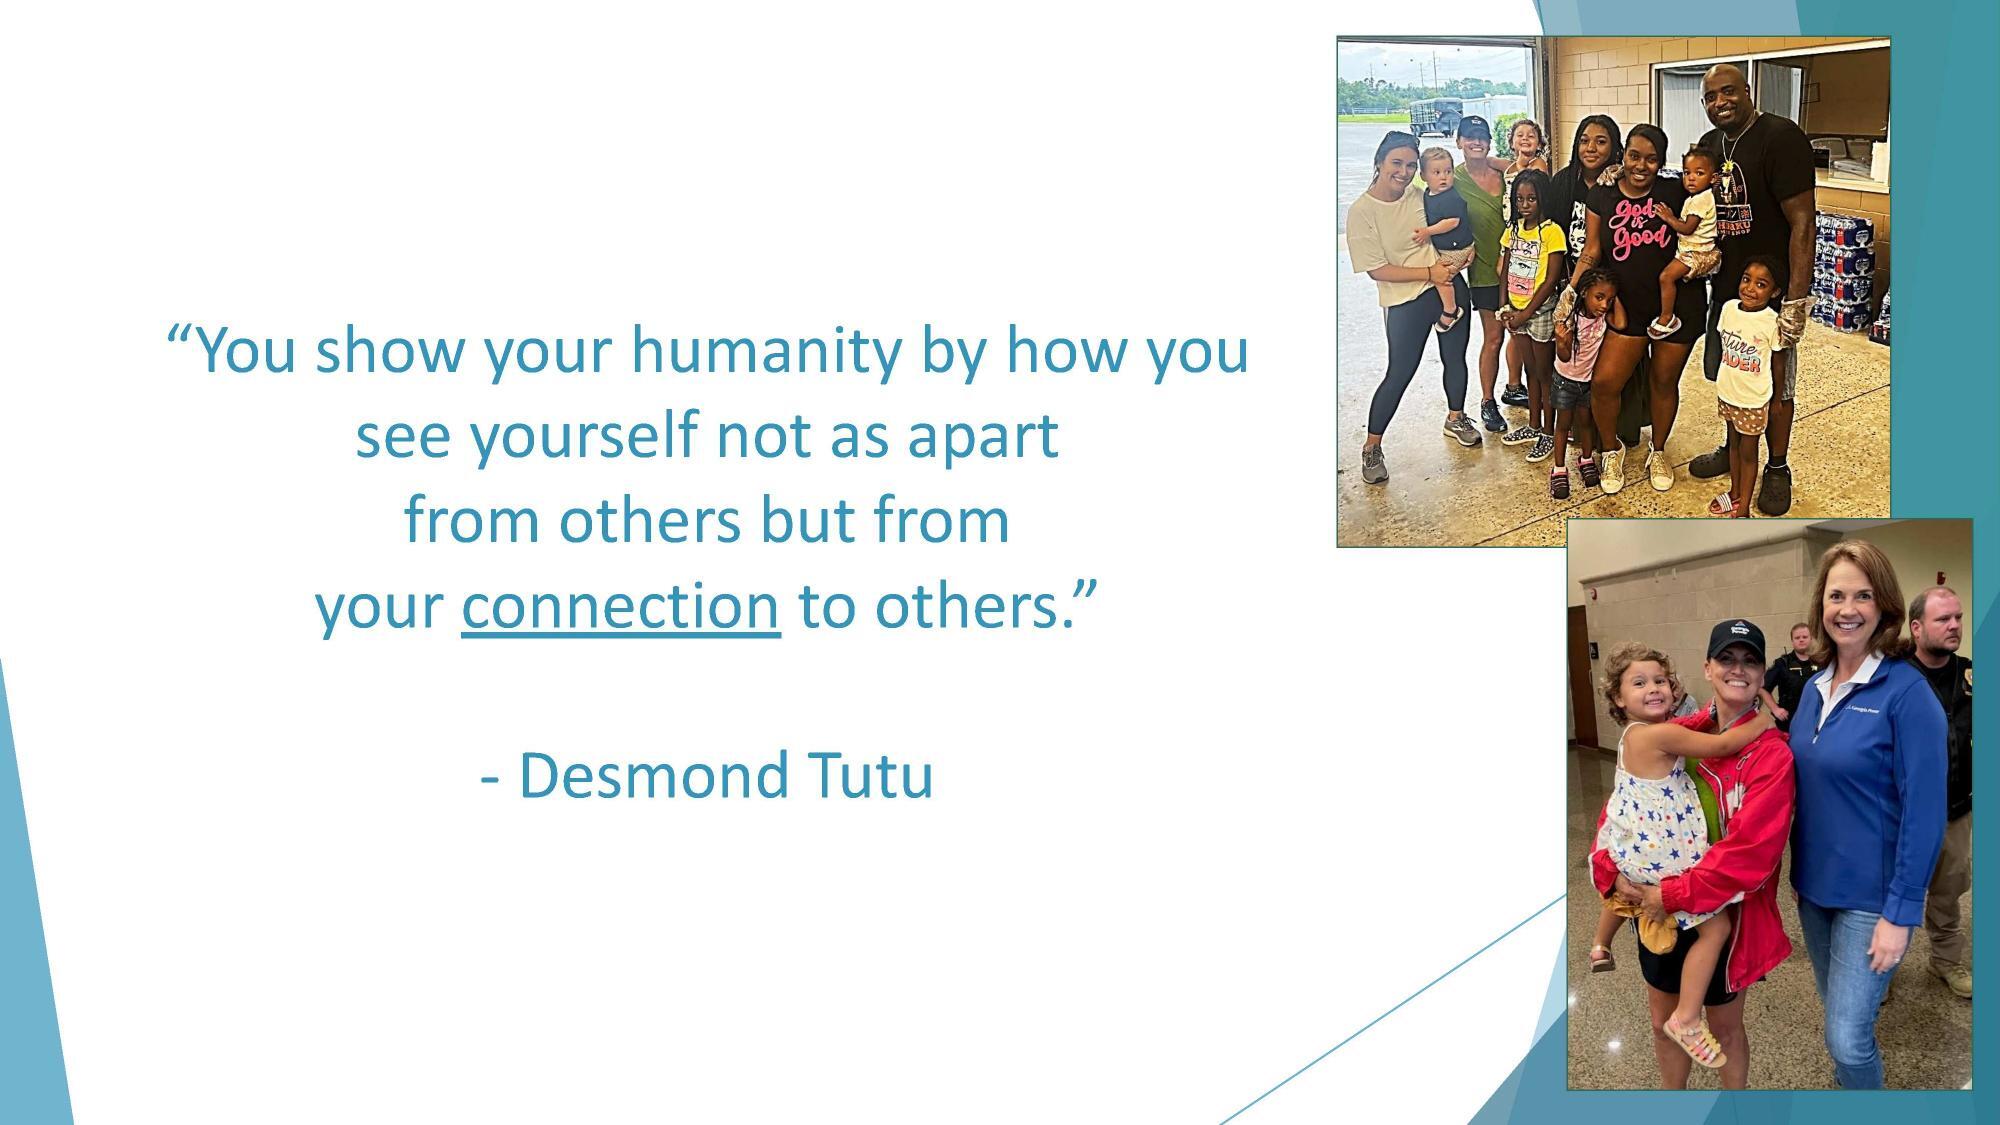 You show your humanity by how you see yourself not as apart from others but from your connection to others. -- Desmond Tutu